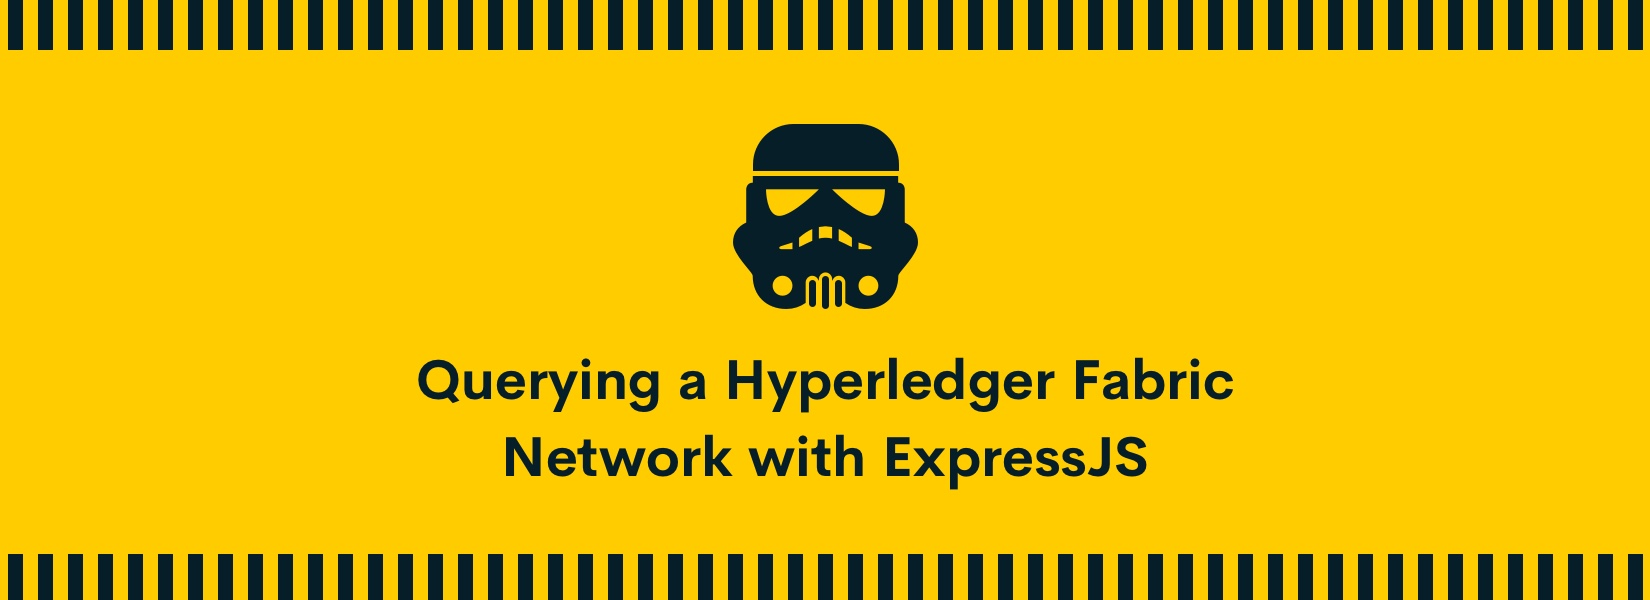 Dummies Guide to Querying a Hyperledger Fabric Blockchain Network with ExpressJS